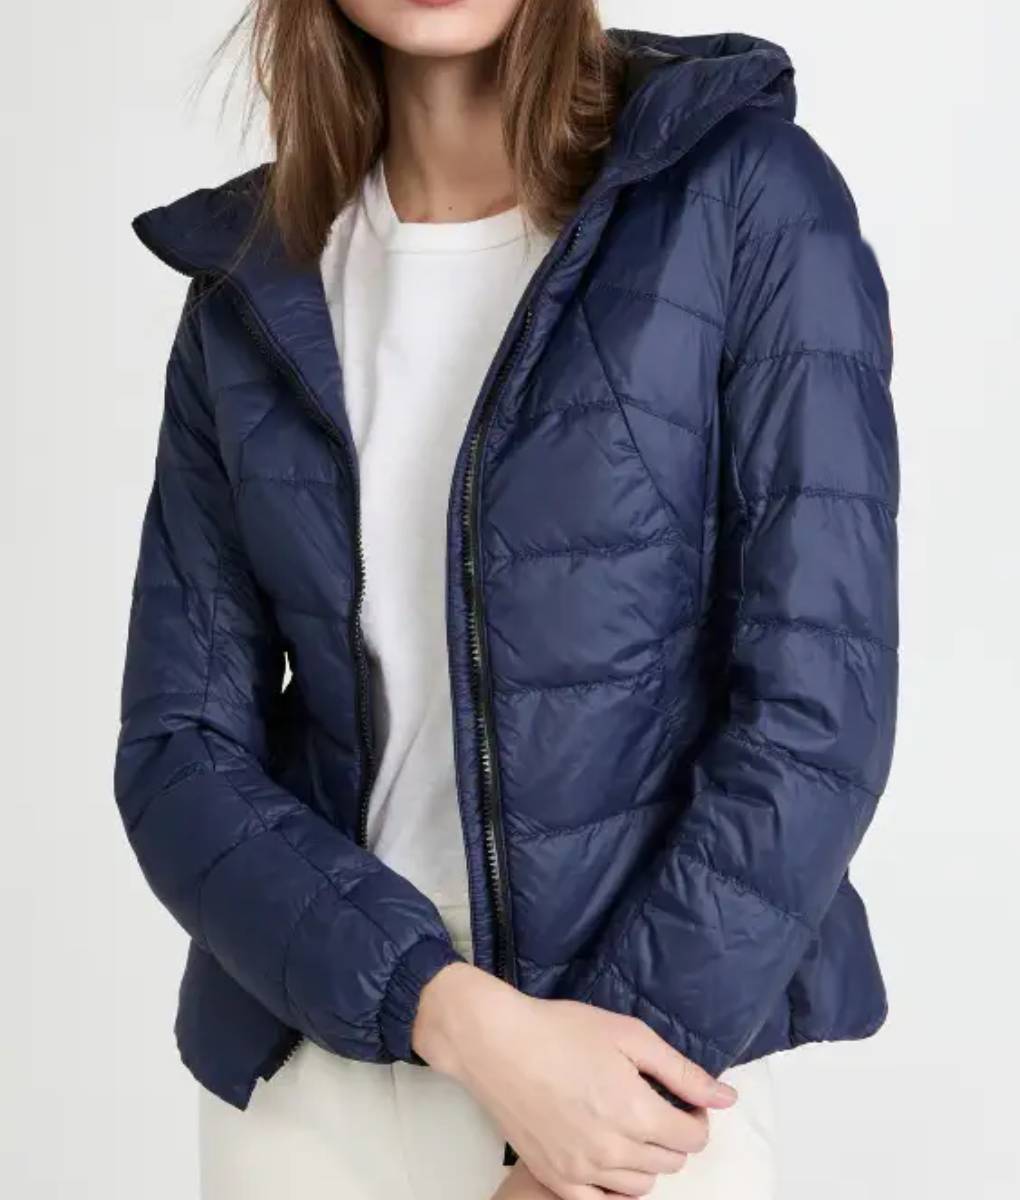 Josephine The Other Zoey Blue Puffer Jacket (3)